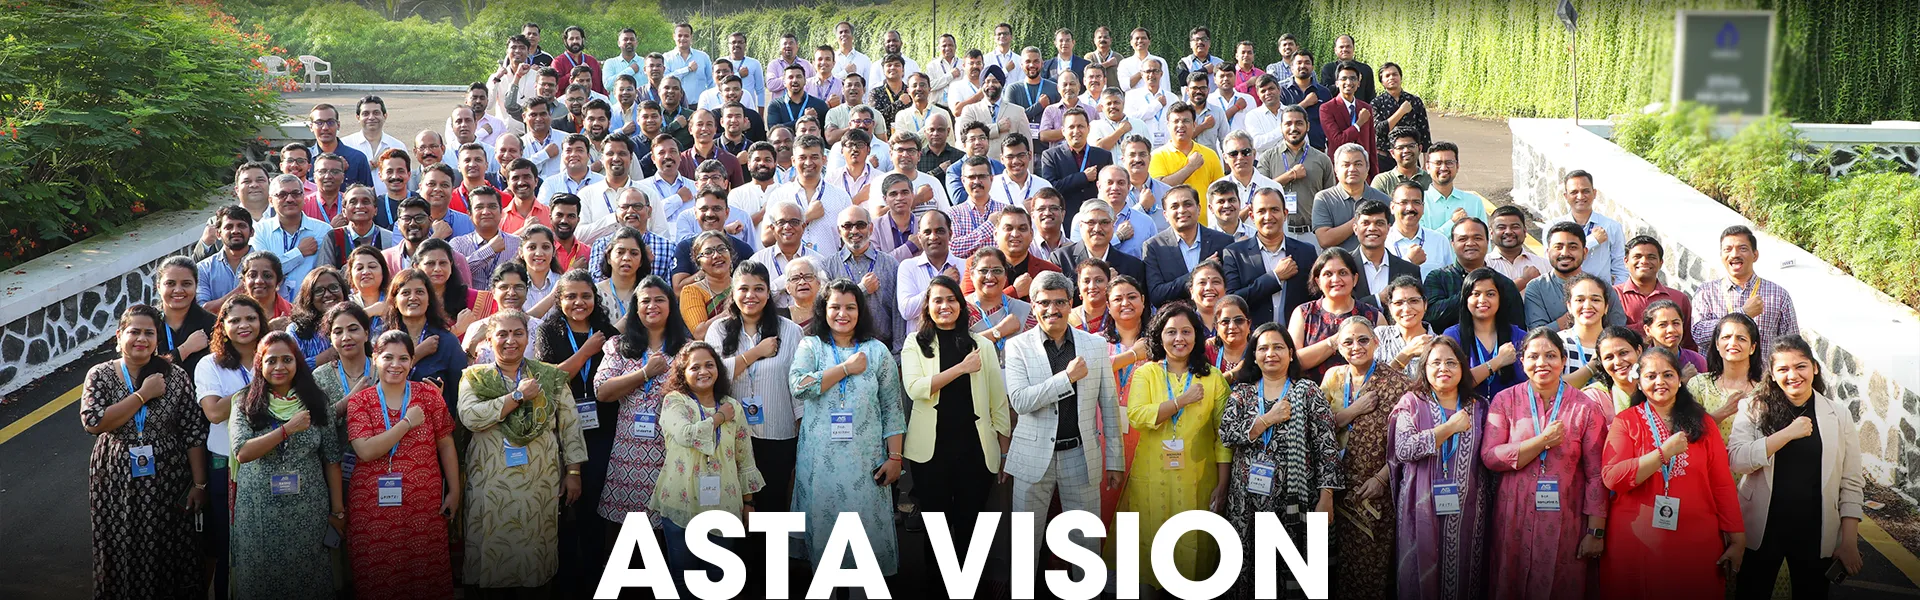 Our Vision - ASTA